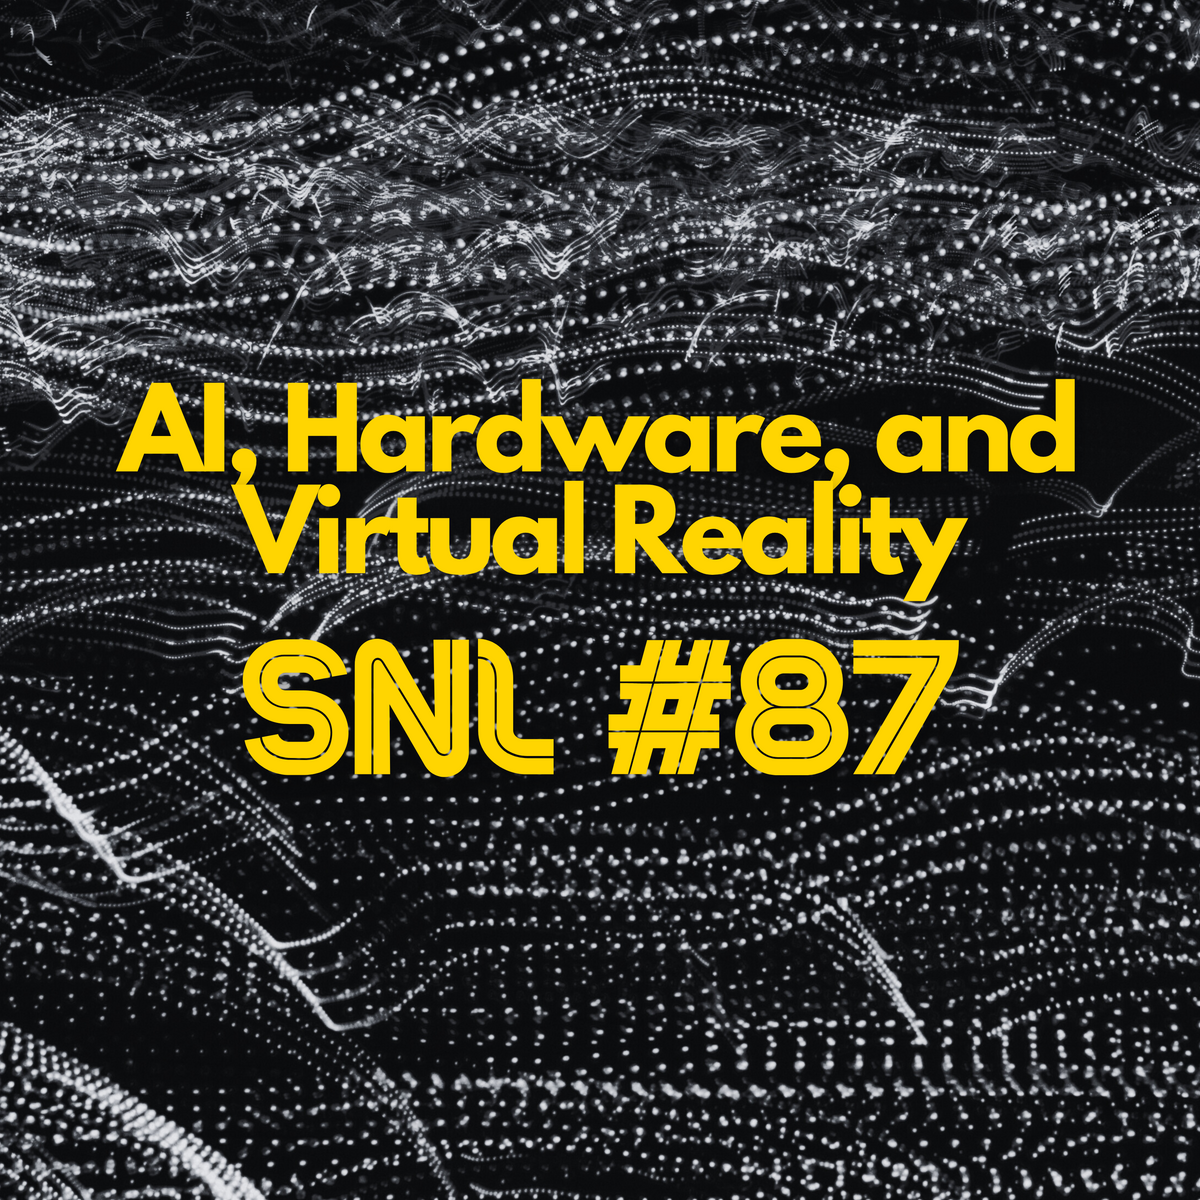 "AI, Hardware, and Virtual Reality" - Stacker News Saturday Newsletter